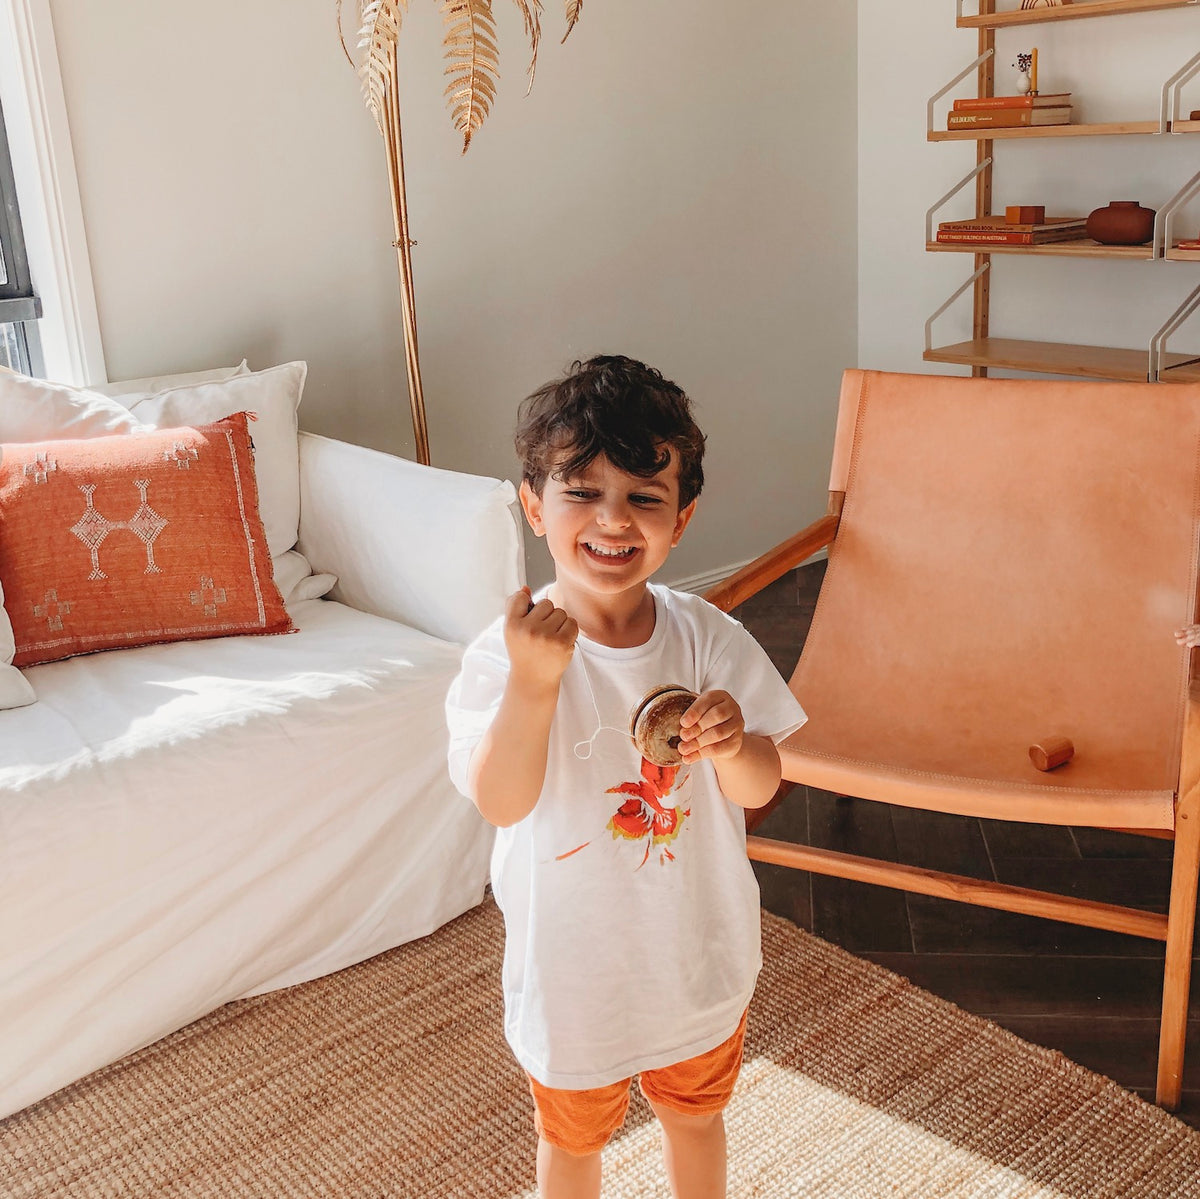 an image of a smiling child with dark hair wearing a white printed tshirt and red shorts standing in front of a  tan coloured chair and white couch playing with a wooden yo yo